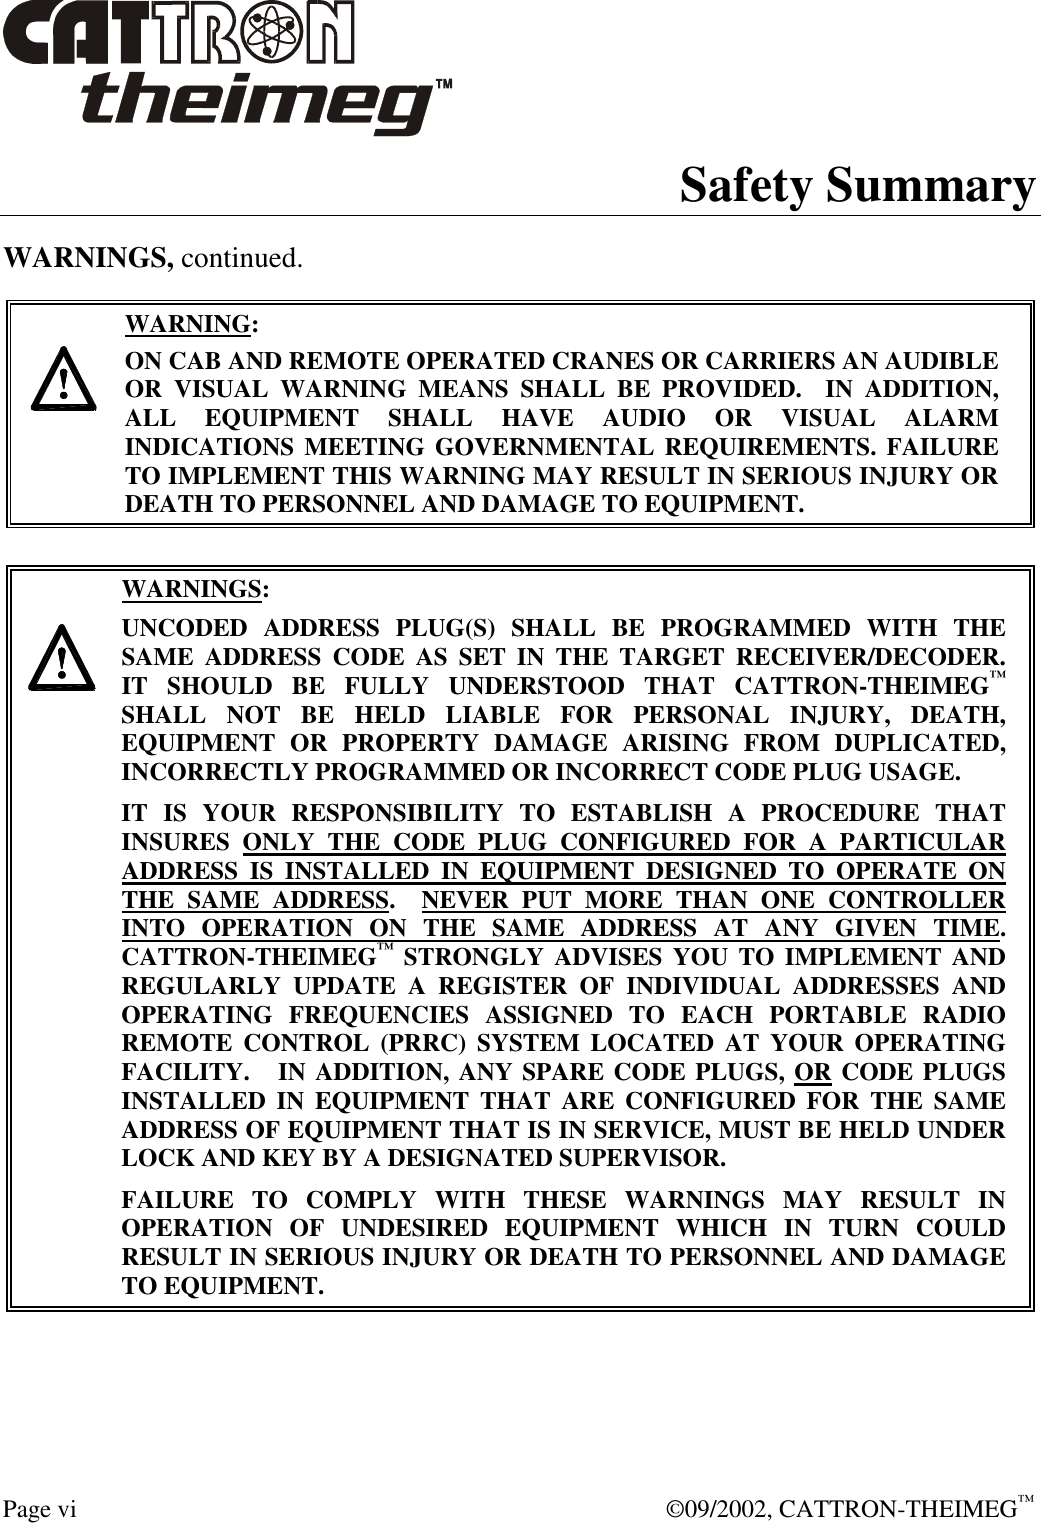  Page vi  ©09/2002, CATTRON-THEIMEG™ Safety Summary WARNINGS, continued.     WARNING: ON CAB AND REMOTE OPERATED CRANES OR CARRIERS AN AUDIBLE OR VISUAL WARNING MEANS SHALL BE PROVIDED.  IN ADDITION, ALL EQUIPMENT SHALL HAVE AUDIO OR VISUAL ALARM INDICATIONS MEETING GOVERNMENTAL REQUIREMENTS. FAILURE TO IMPLEMENT THIS WARNING MAY RESULT IN SERIOUS INJURY OR DEATH TO PERSONNEL AND DAMAGE TO EQUIPMENT.     WARNINGS: UNCODED ADDRESS PLUG(S) SHALL BE PROGRAMMED WITH THE SAME ADDRESS CODE AS SET IN THE TARGET RECEIVER/DECODER.    IT SHOULD BE FULLY UNDERSTOOD THAT CATTRON-THEIMEG™ SHALL NOT BE HELD LIABLE FOR PERSONAL INJURY, DEATH, EQUIPMENT OR PROPERTY DAMAGE ARISING FROM DUPLICATED, INCORRECTLY PROGRAMMED OR INCORRECT CODE PLUG USAGE. IT IS YOUR RESPONSIBILITY TO ESTABLISH A PROCEDURE THAT INSURES ONLY THE CODE PLUG CONFIGURED FOR A PARTICULAR ADDRESS IS INSTALLED IN EQUIPMENT DESIGNED TO OPERATE ON THE SAME ADDRESS.  NEVER PUT MORE THAN ONE CONTROLLER INTO OPERATION ON THE SAME ADDRESS AT ANY GIVEN TIME.  CATTRON-THEIMEG™ STRONGLY ADVISES YOU TO IMPLEMENT AND REGULARLY UPDATE A REGISTER OF INDIVIDUAL ADDRESSES AND OPERATING FREQUENCIES ASSIGNED TO EACH PORTABLE RADIO REMOTE CONTROL (PRRC) SYSTEM LOCATED AT YOUR OPERATING FACILITY.   IN ADDITION, ANY SPARE CODE PLUGS, OR CODE PLUGS INSTALLED IN EQUIPMENT THAT ARE CONFIGURED FOR THE SAME ADDRESS OF EQUIPMENT THAT IS IN SERVICE, MUST BE HELD UNDER LOCK AND KEY BY A DESIGNATED SUPERVISOR.   FAILURE TO COMPLY WITH THESE WARNINGS MAY RESULT IN OPERATION OF UNDESIRED EQUIPMENT WHICH IN TURN COULD RESULT IN SERIOUS INJURY OR DEATH TO PERSONNEL AND DAMAGE TO EQUIPMENT.  